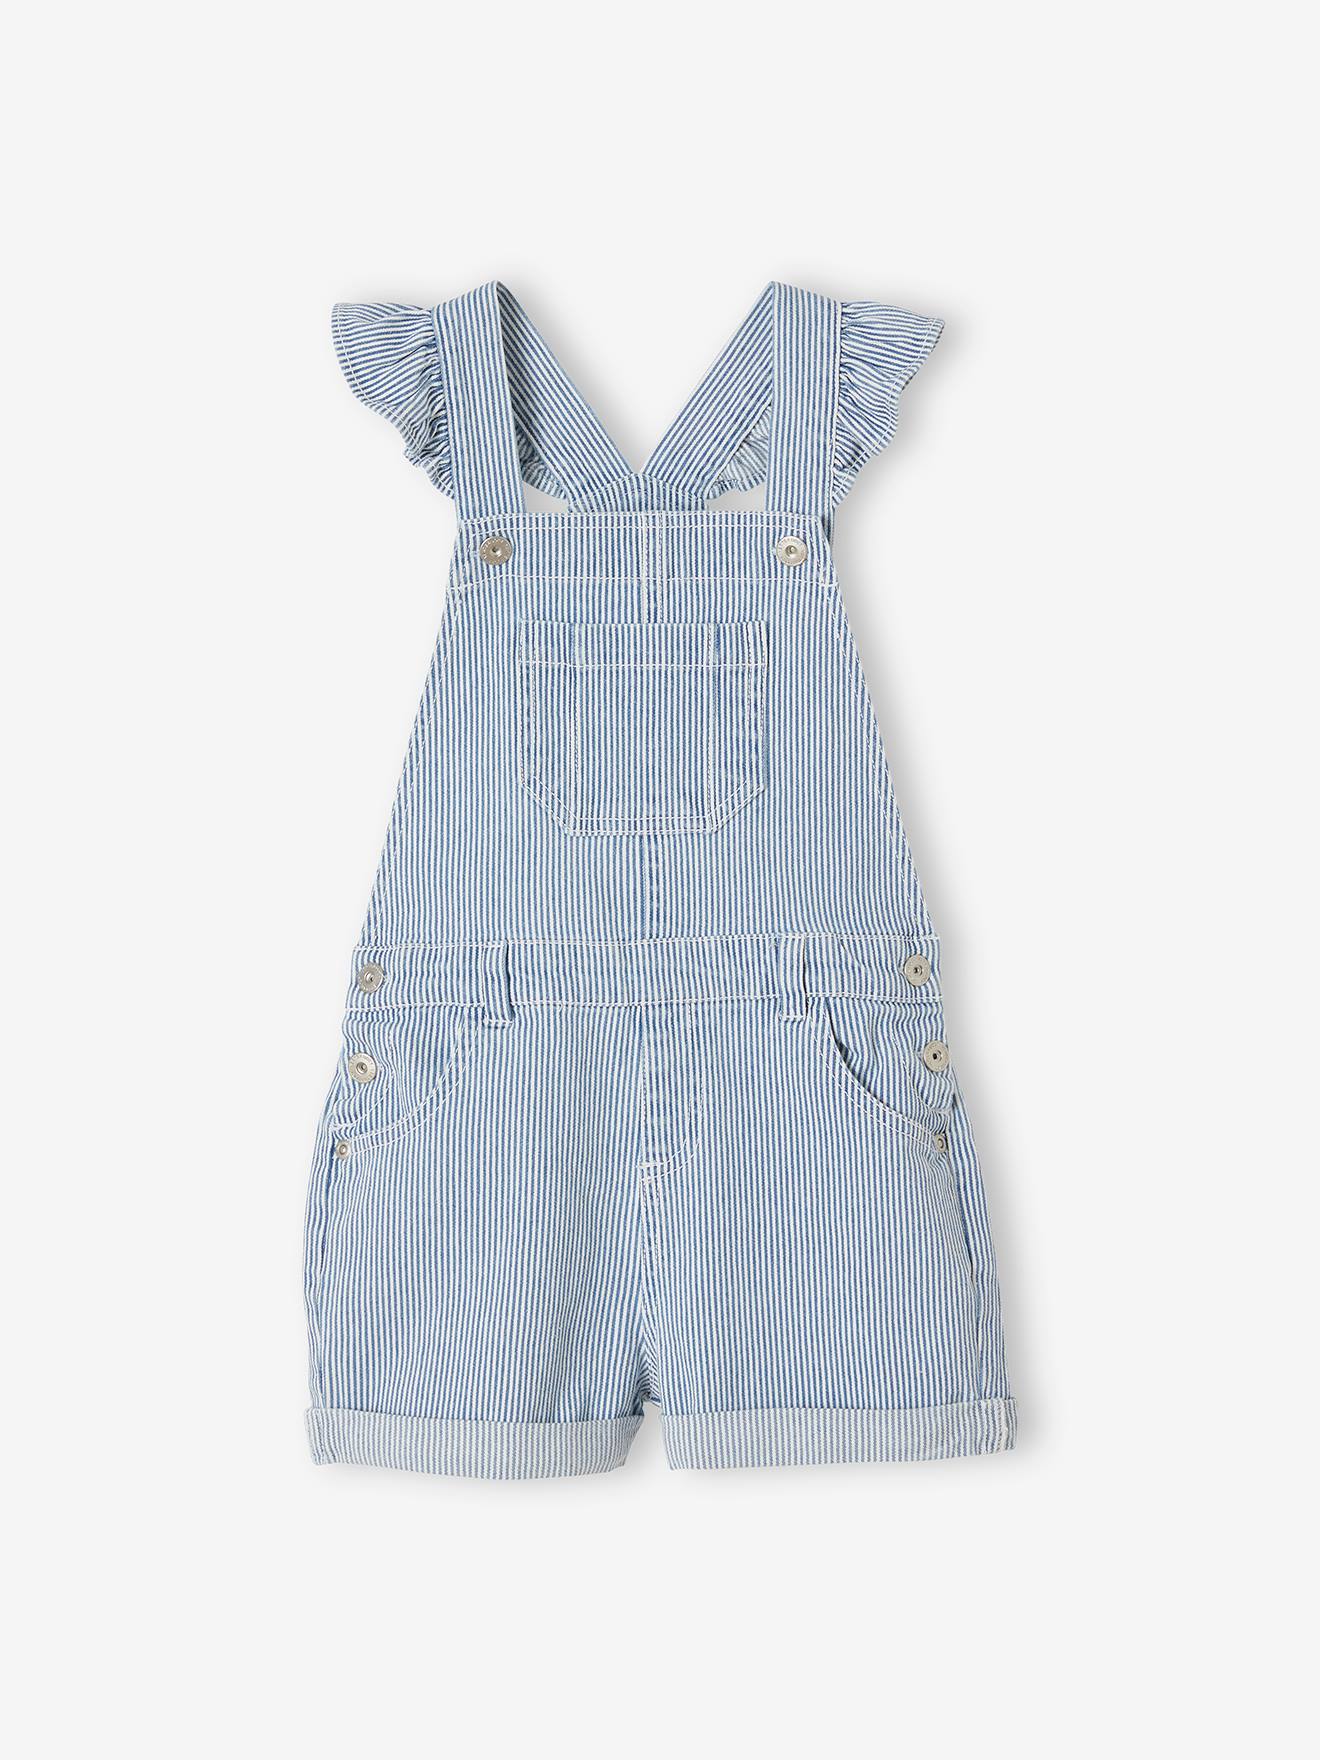 Girls Denim Dungaree Shorts Dungarees 7-8 Years Brand New 50% OFF DS7-8-A 